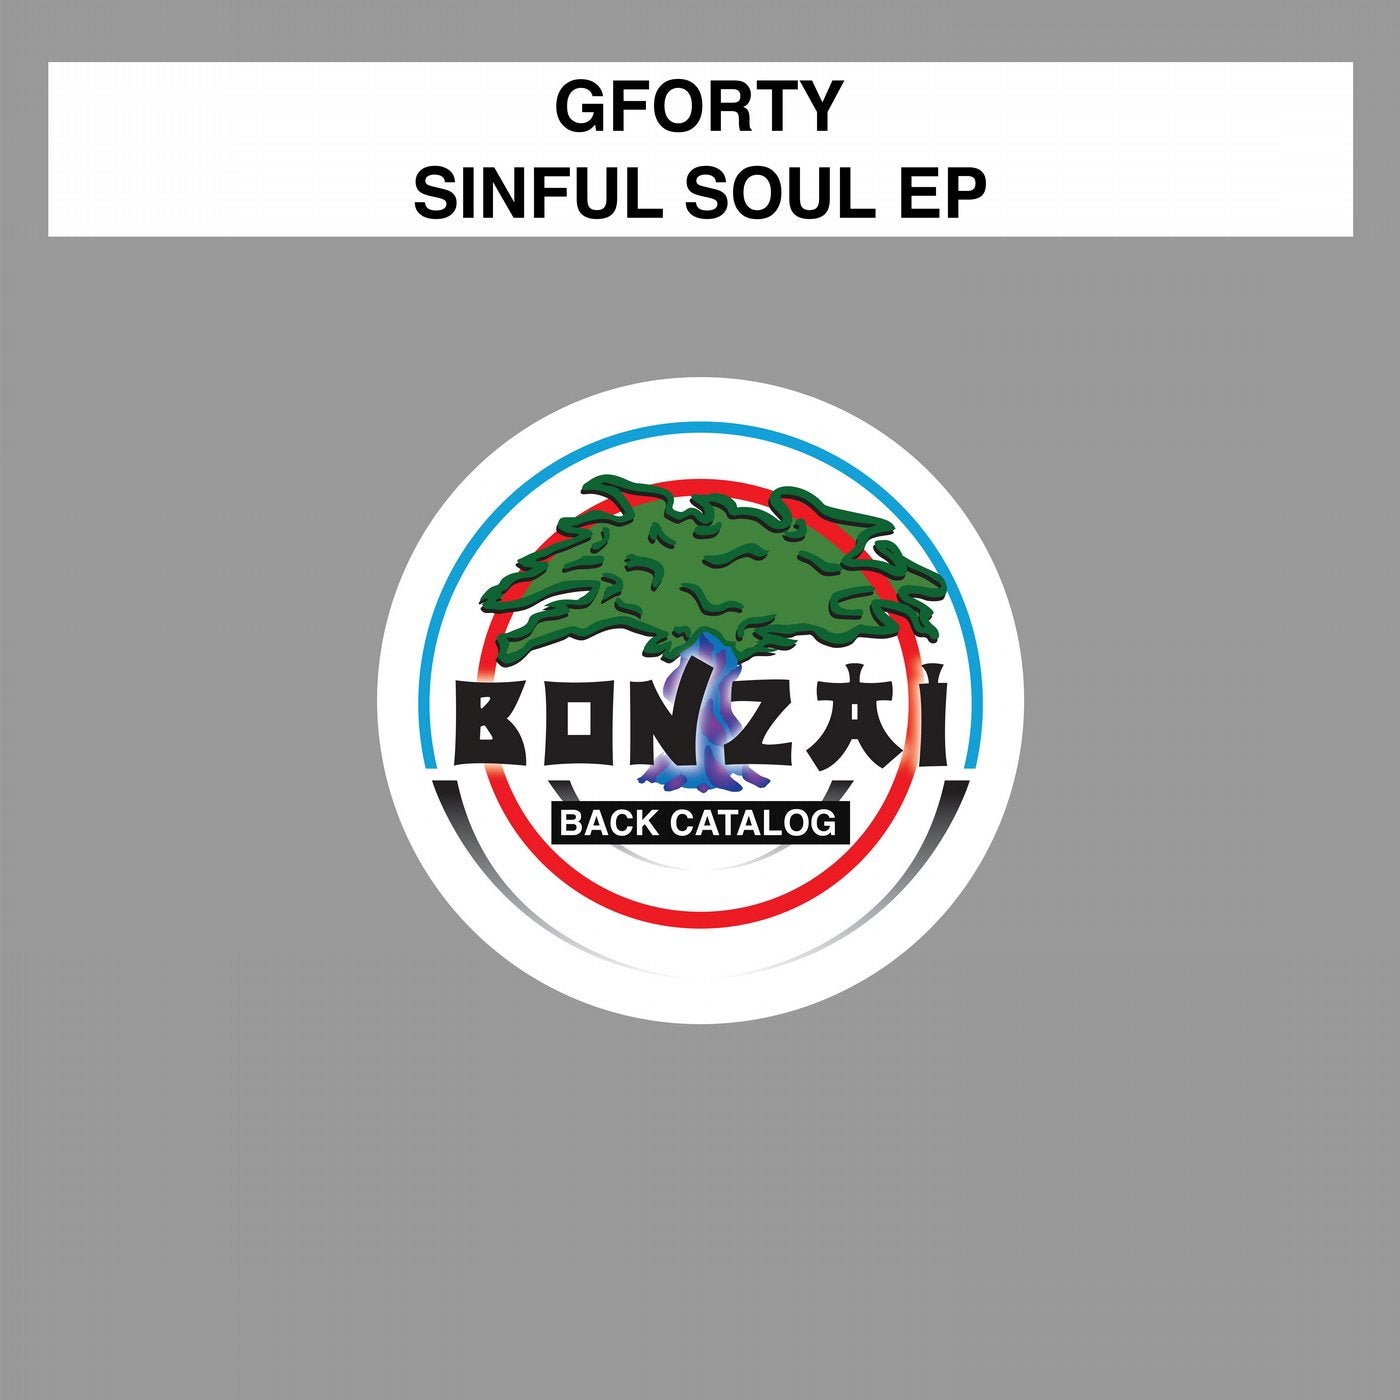 Sinful Soul EP